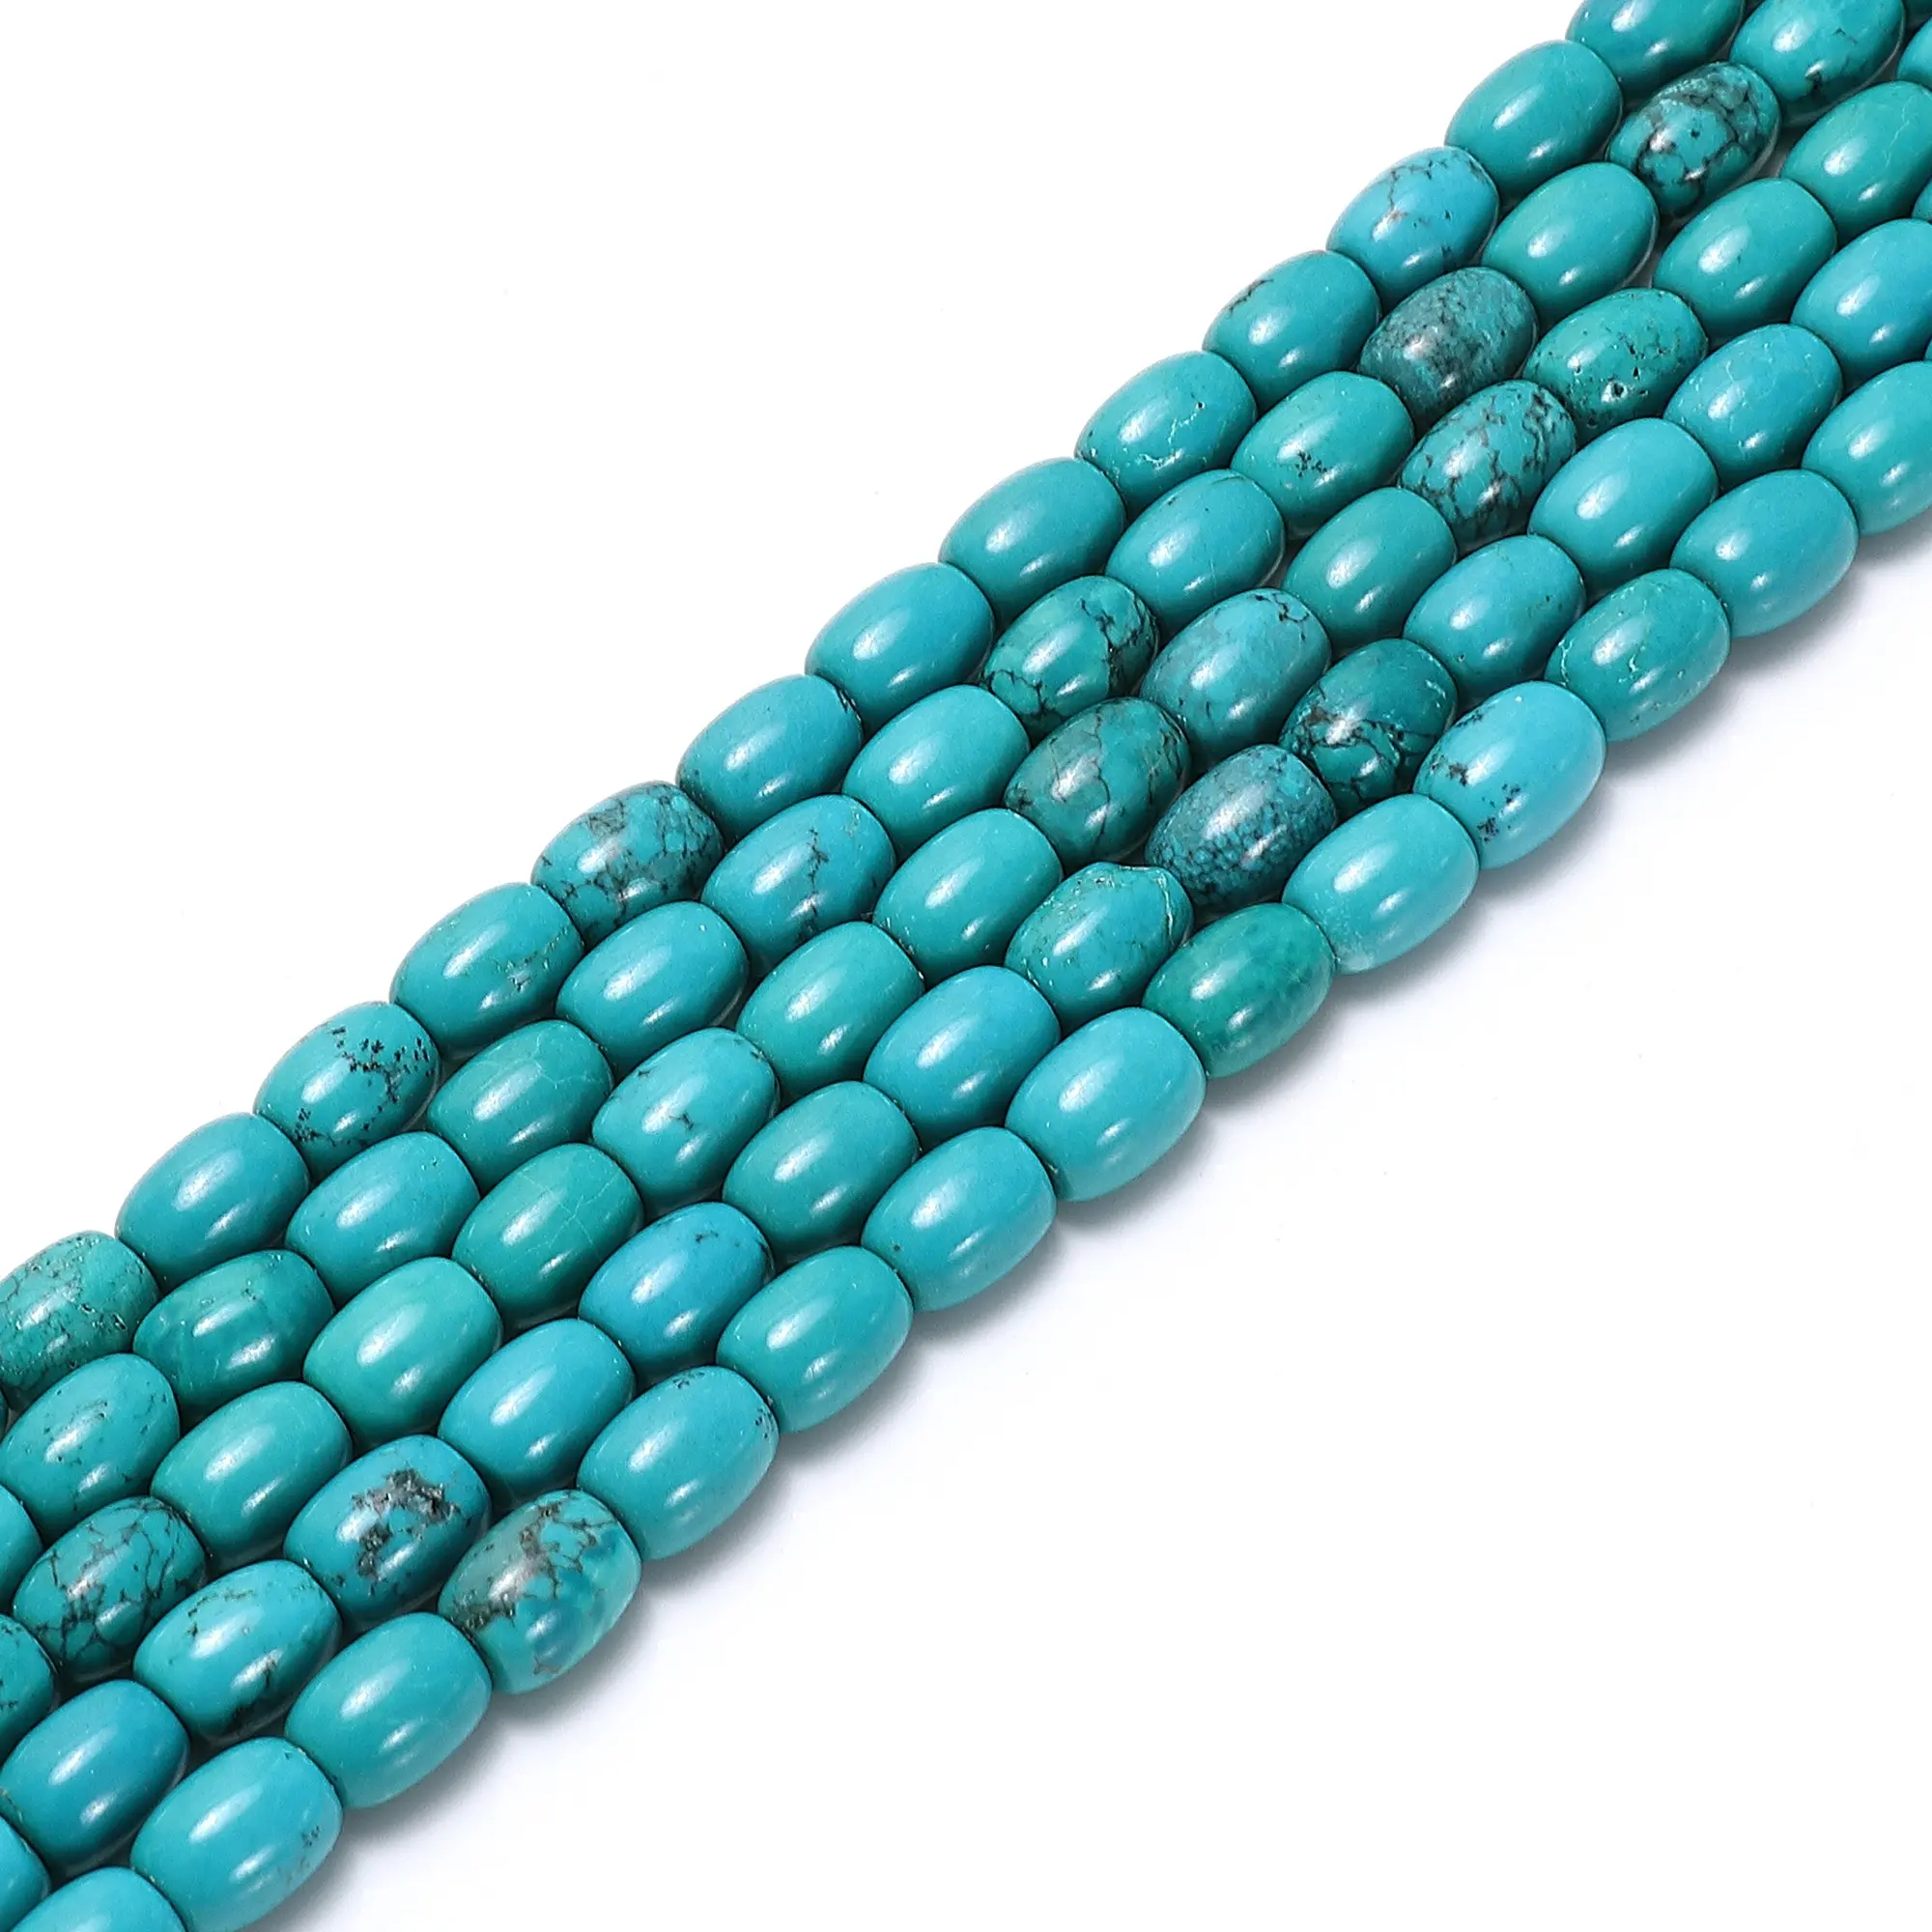 Loose 5x7mm 7x9mm Blue Green Turquoise Gemstone Bead Strands Barrel Shape Stone Beads for Jewlery Making